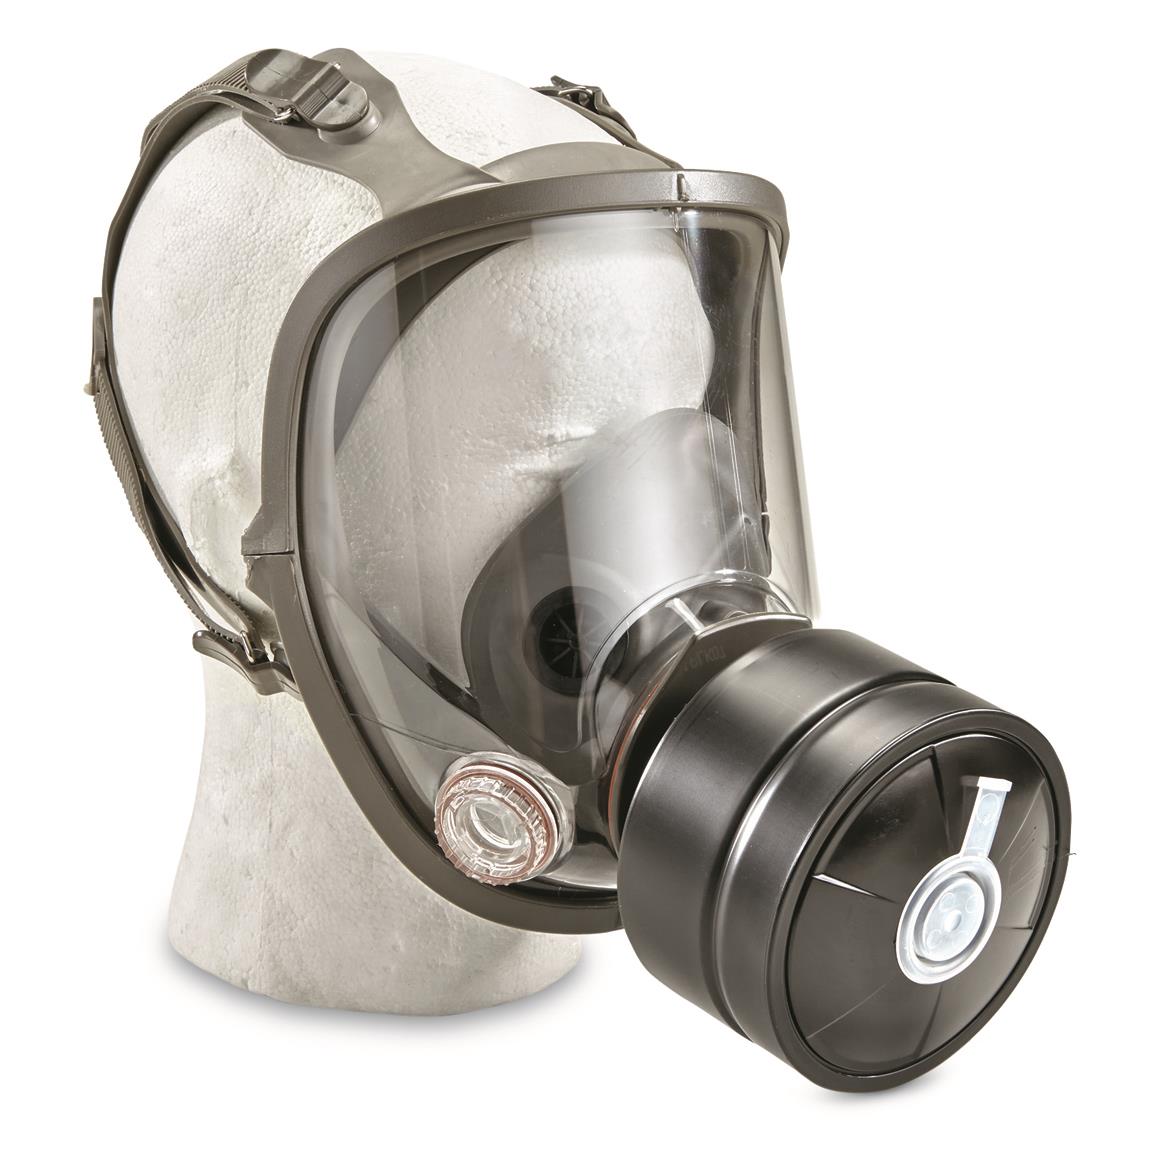 Chinese Military Surplus Panoramic Gas Mask with NATO 40mm Filter, New